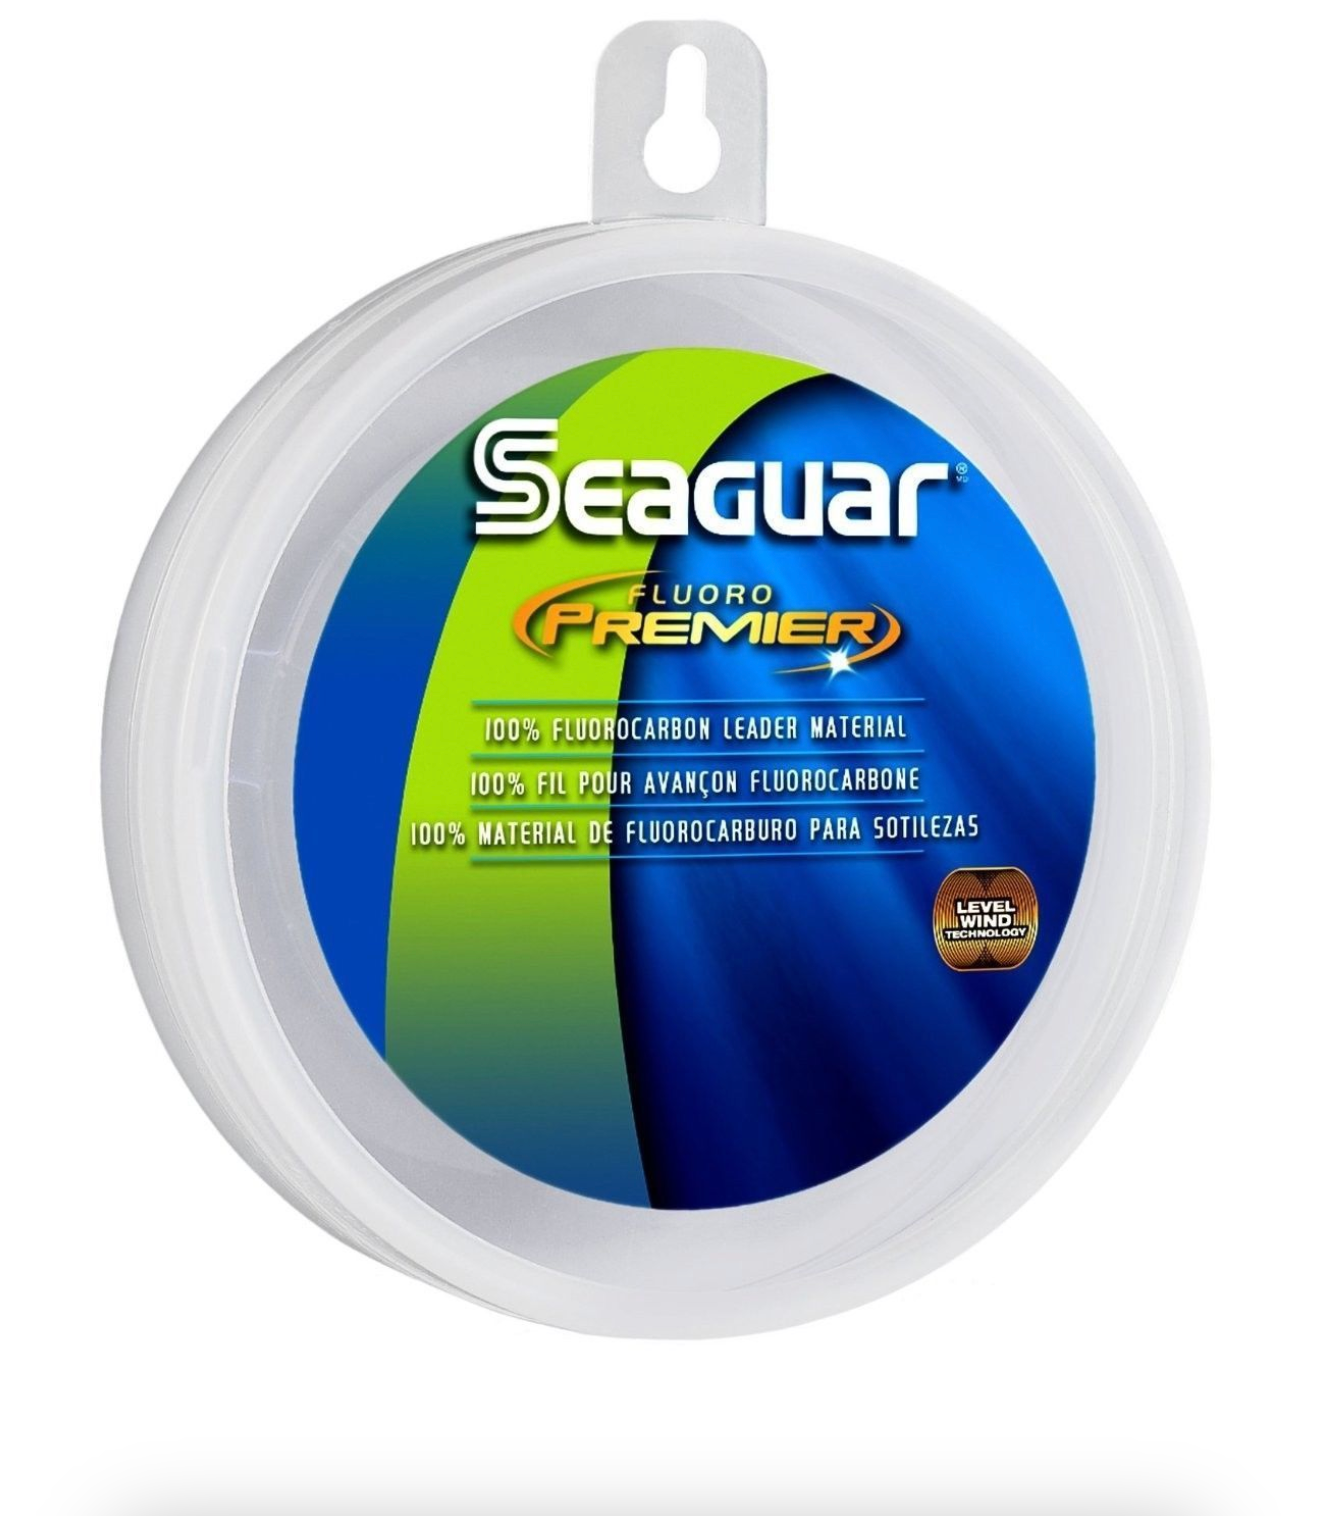 Seaguar Fluorocarbon Leader 80lb/25yd Leader Material S80FC25 - American  Legacy Fishing, G Loomis Superstore